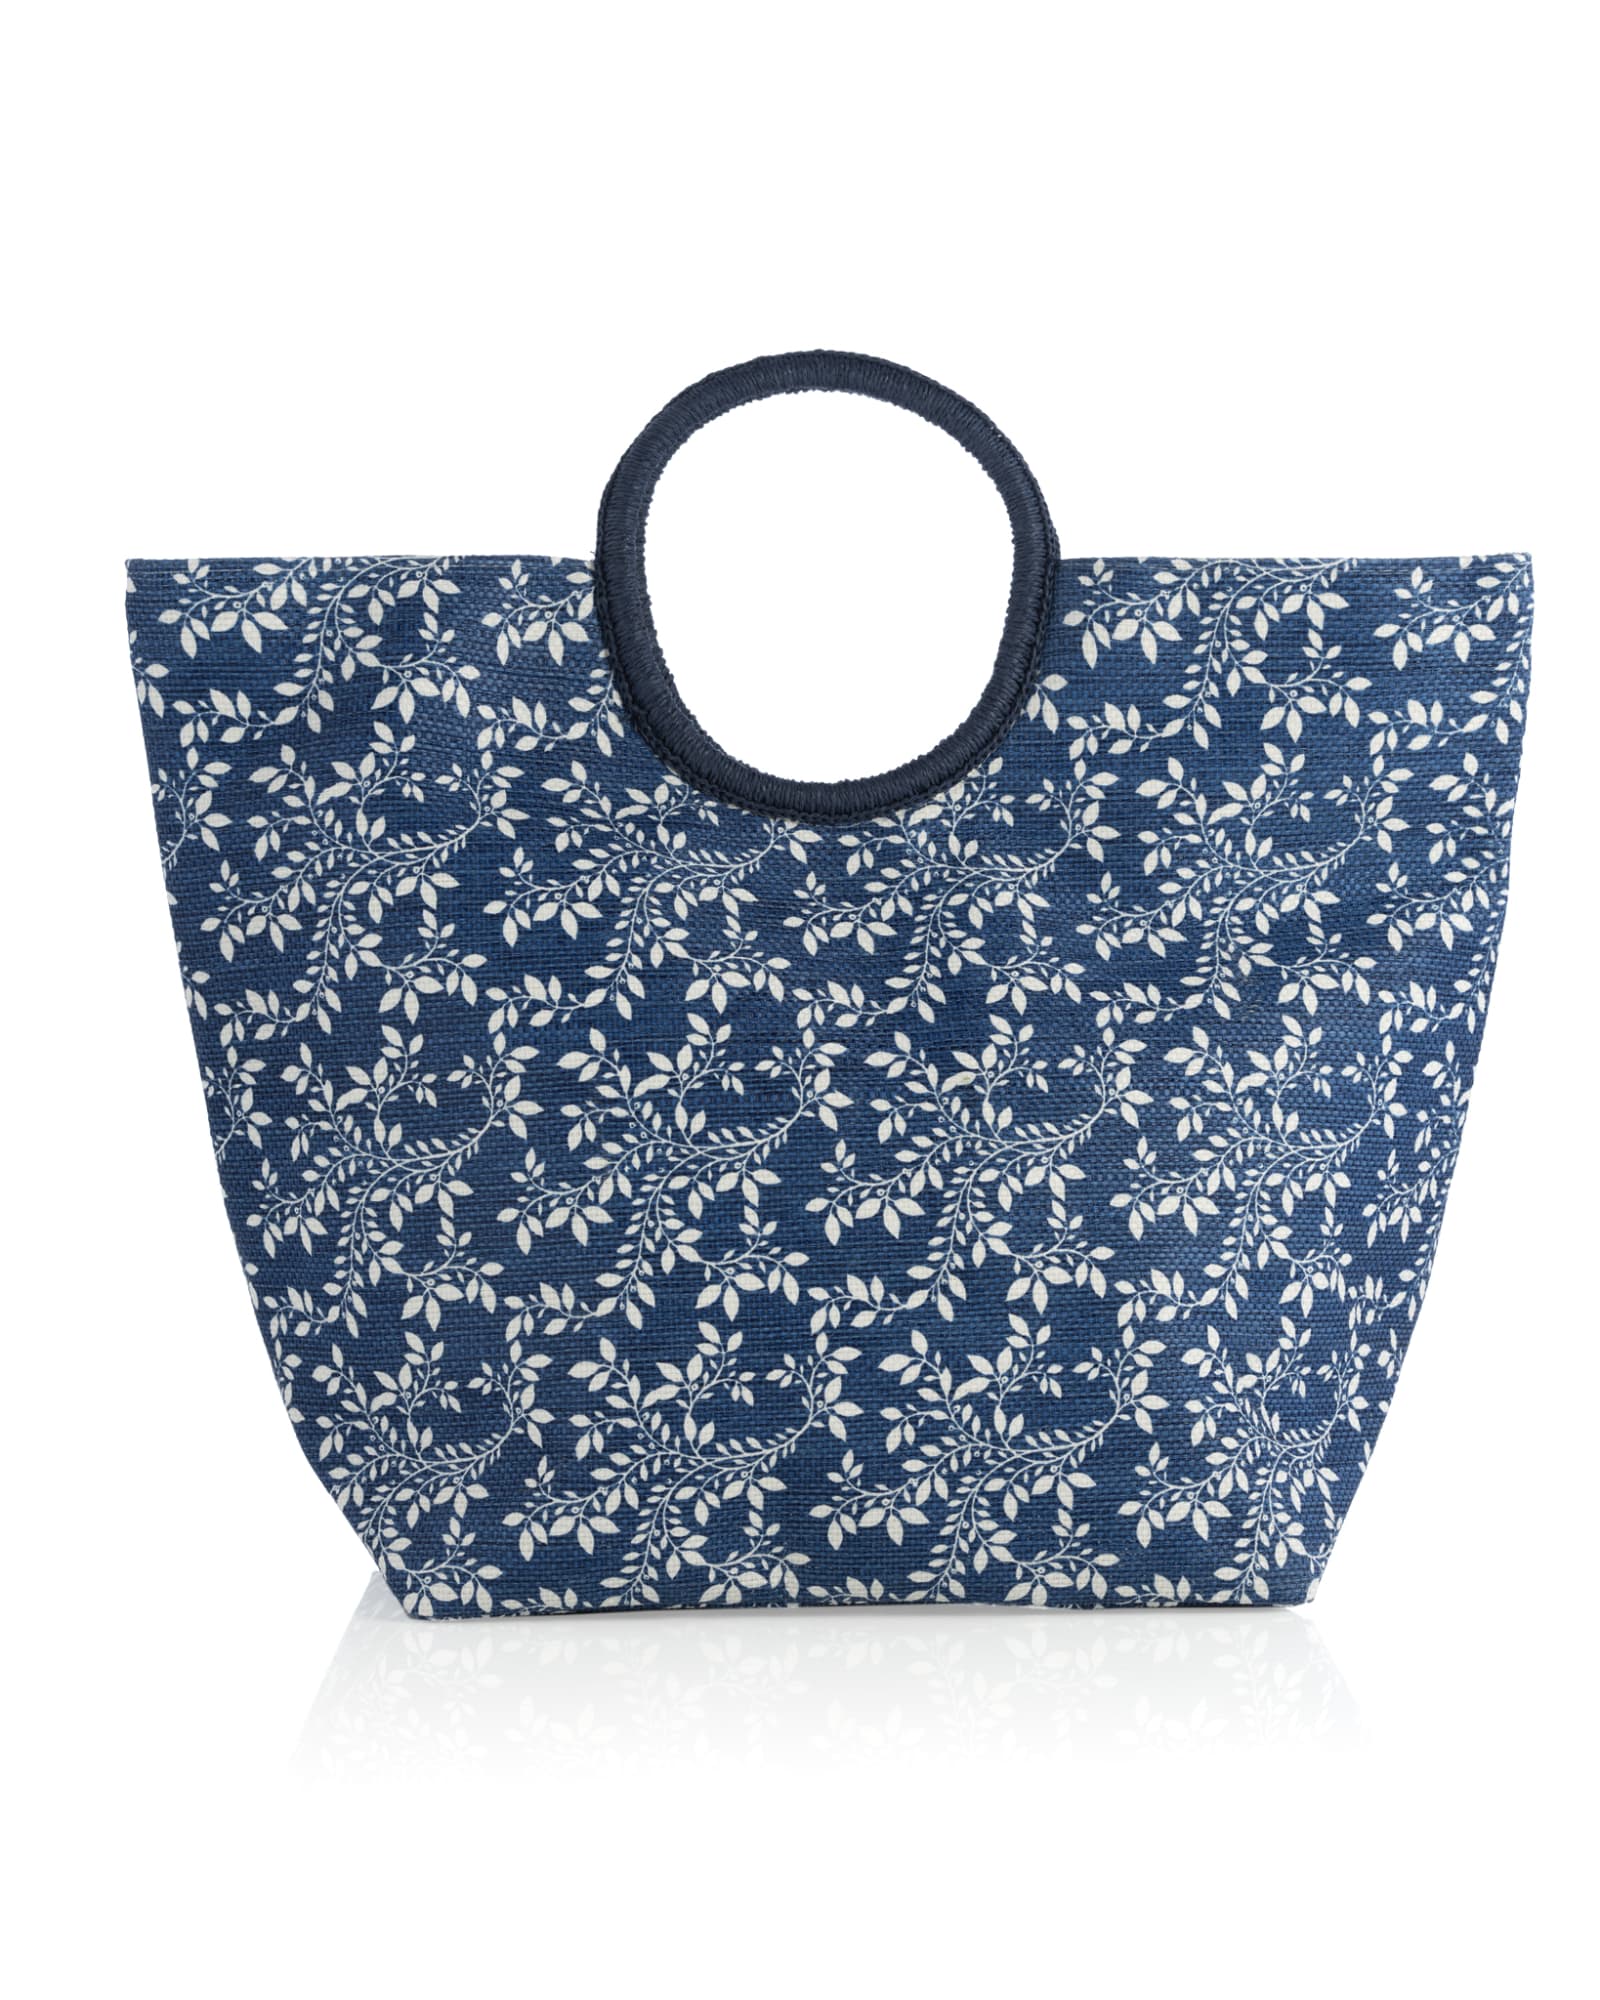 DAY TOTE MUSTARD – MADE FREE®